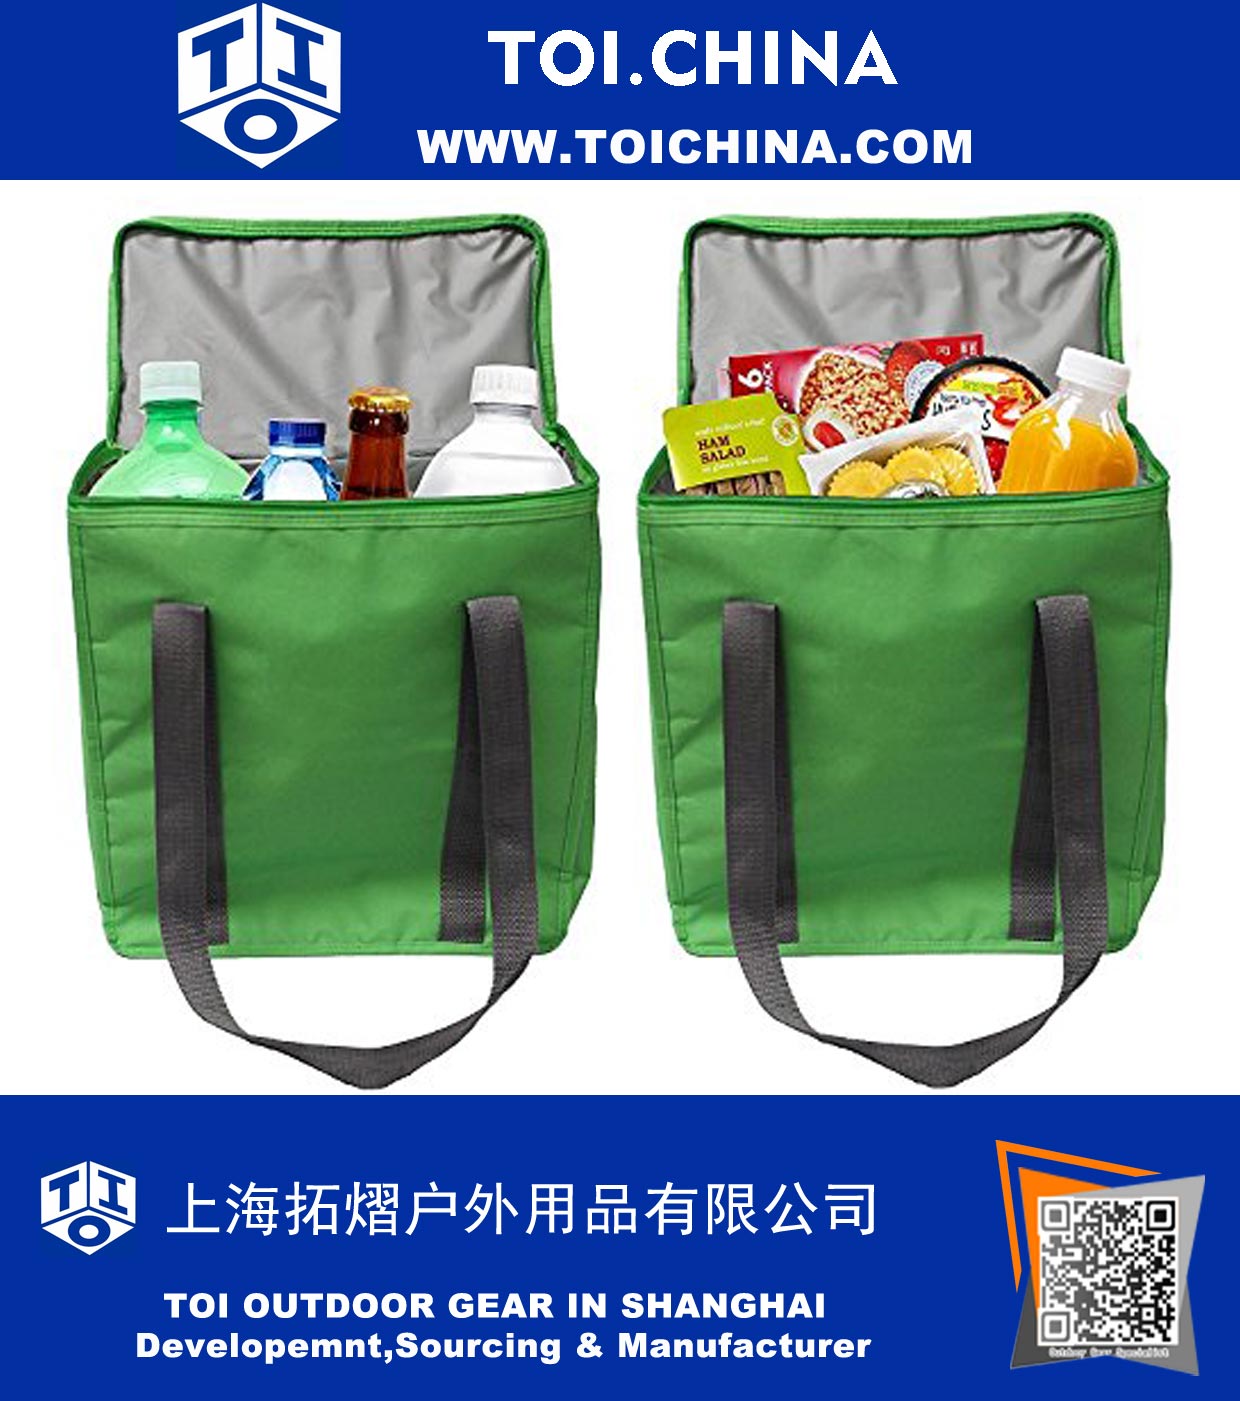 Large Insulated Grocery Bag Shopping Tote Cooler with Zipper Top Lid